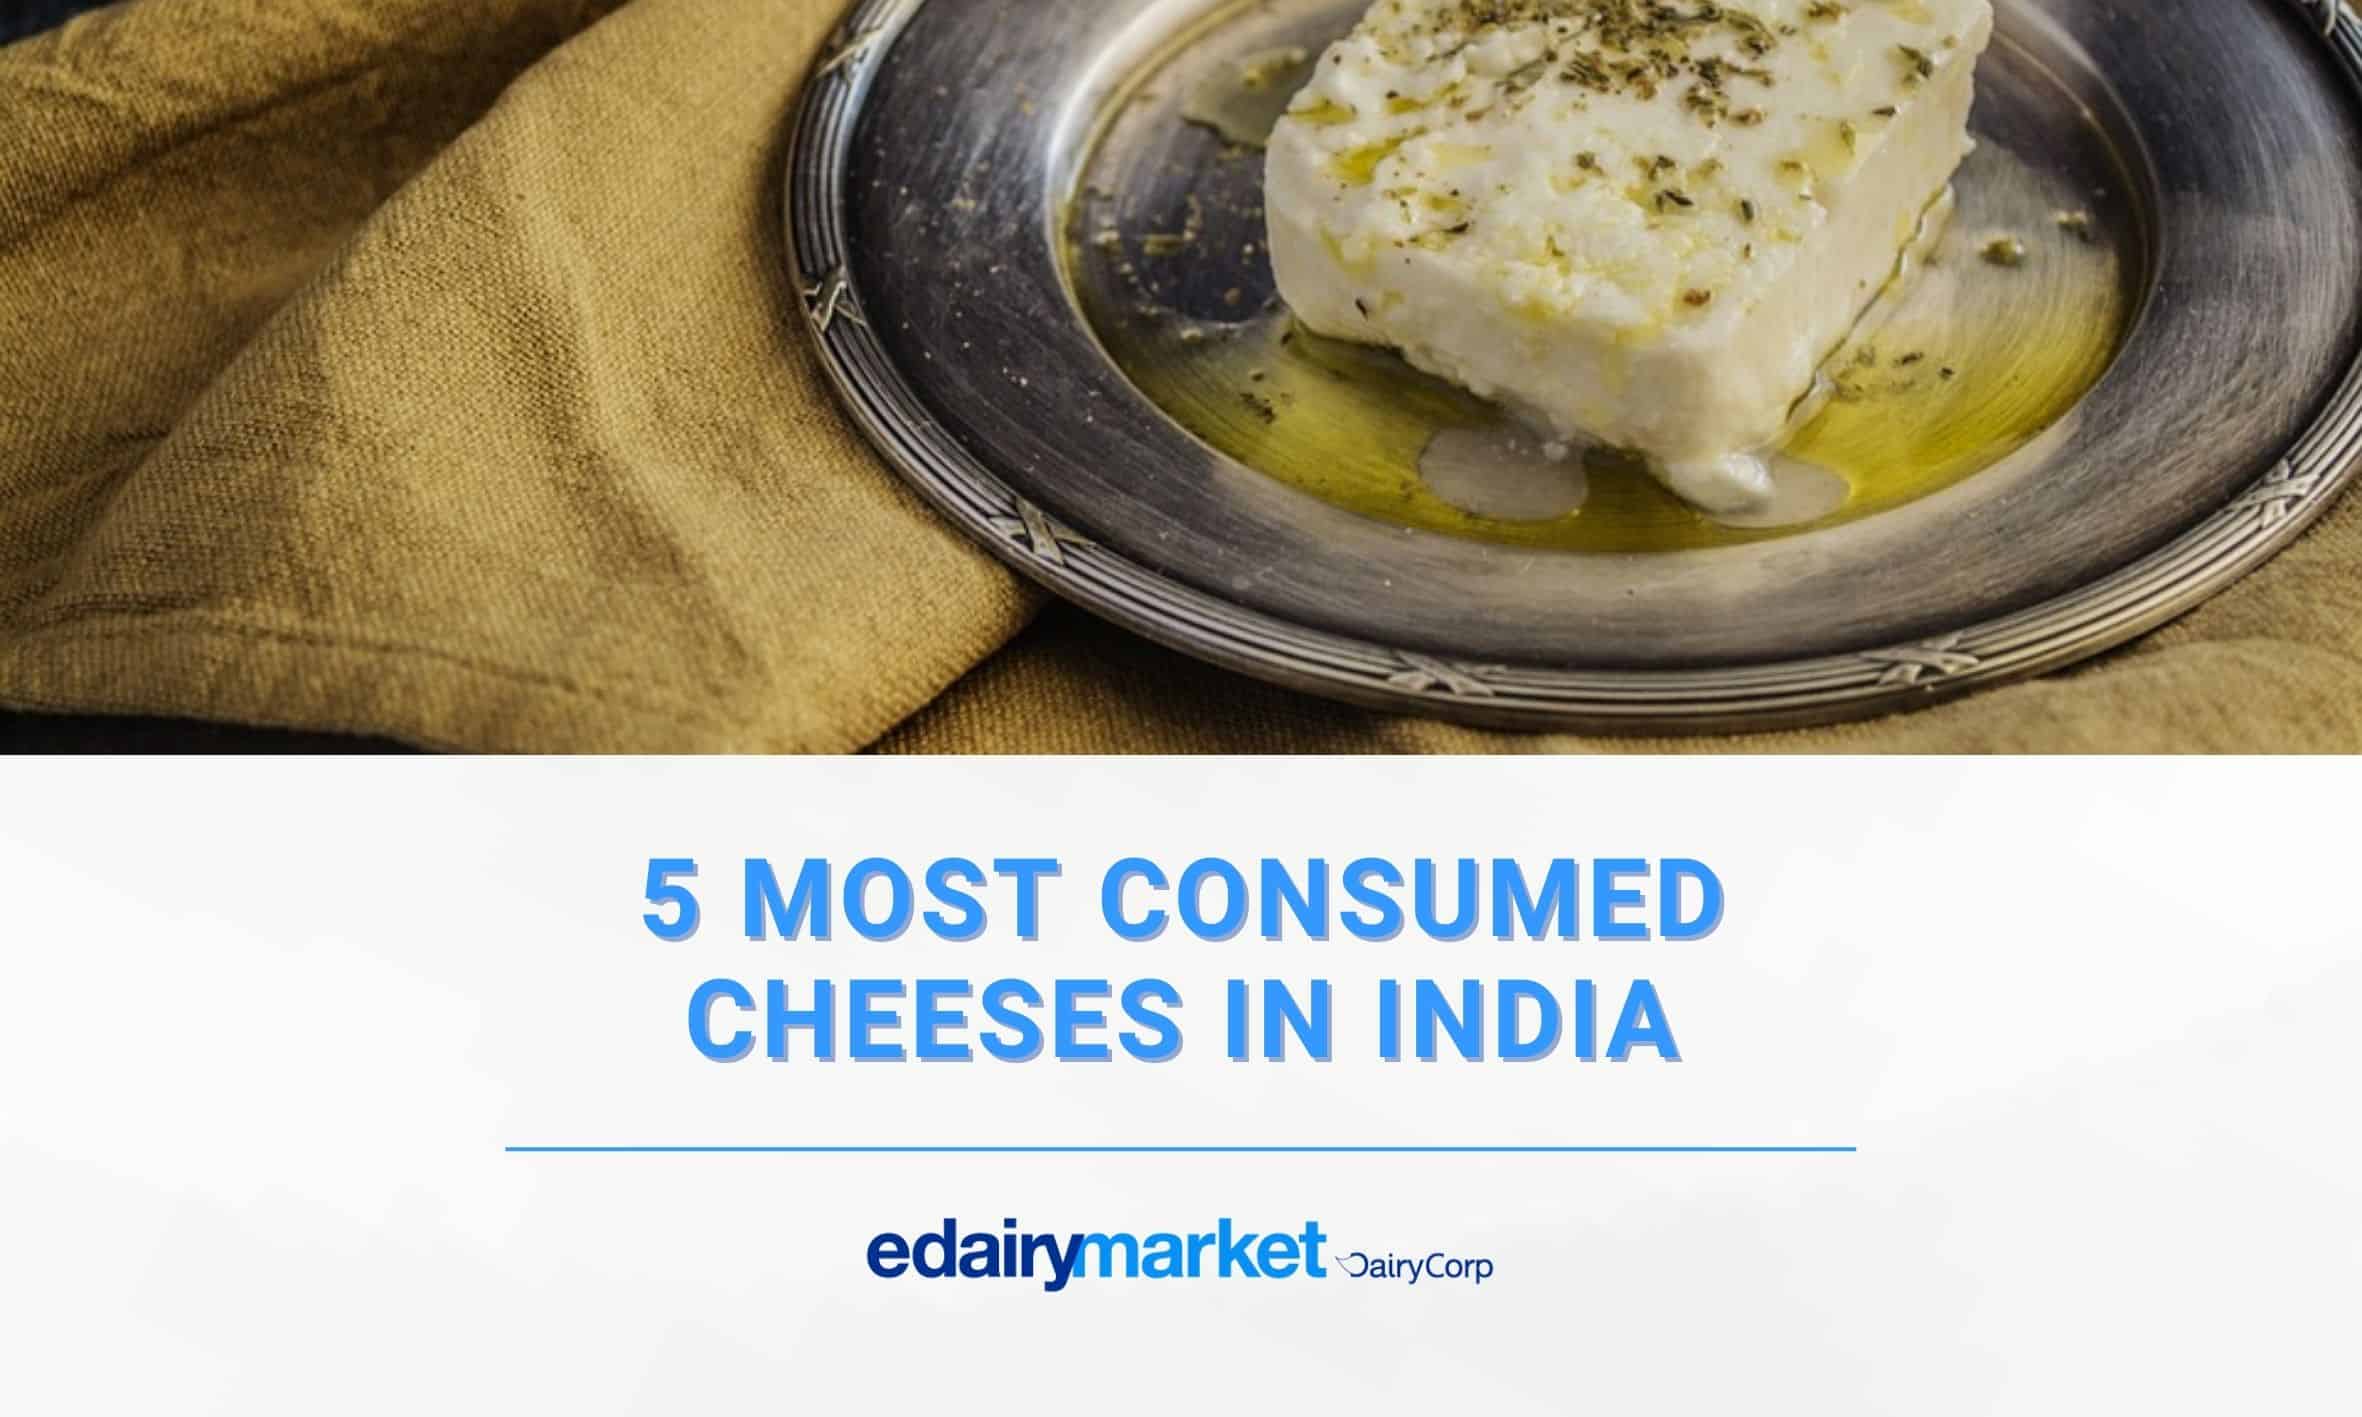 5 most consumed cheeses in India